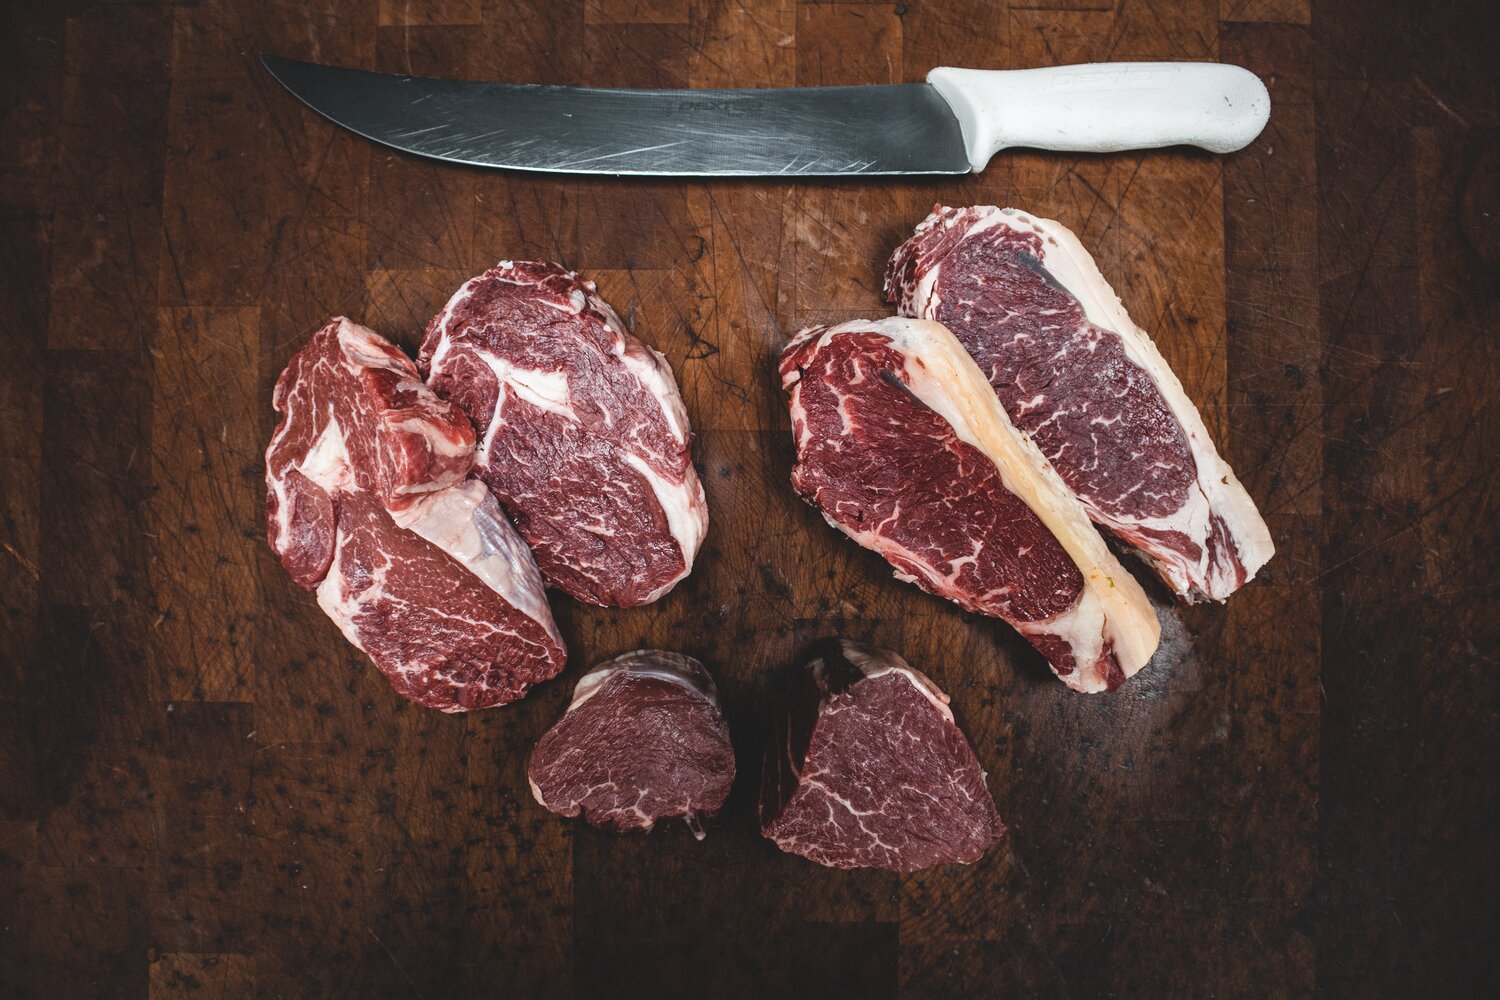 Are we starting to eat meat differently?